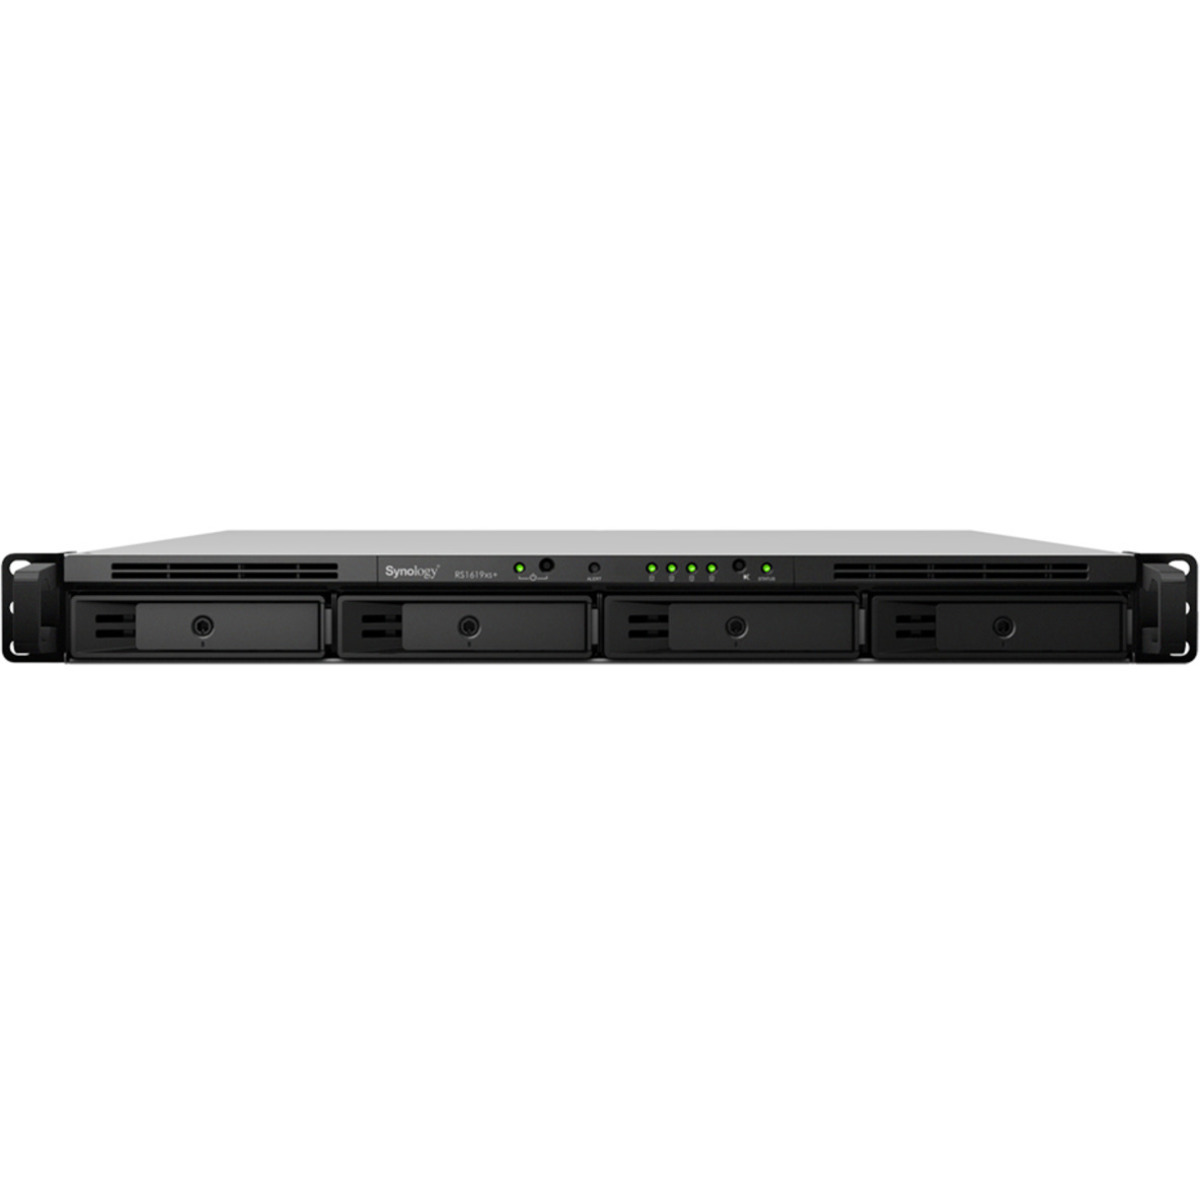 Synology RackStation RS1619xs+ 40tb 4-Bay RackMount Multimedia / Power User / Business NAS - Network Attached Storage Device 2x20tb Seagate IronWolf Pro ST20000NT001 3.5 7200rpm SATA 6Gb/s HDD NAS Class Drives Installed - Burn-In Tested RackStation RS1619xs+